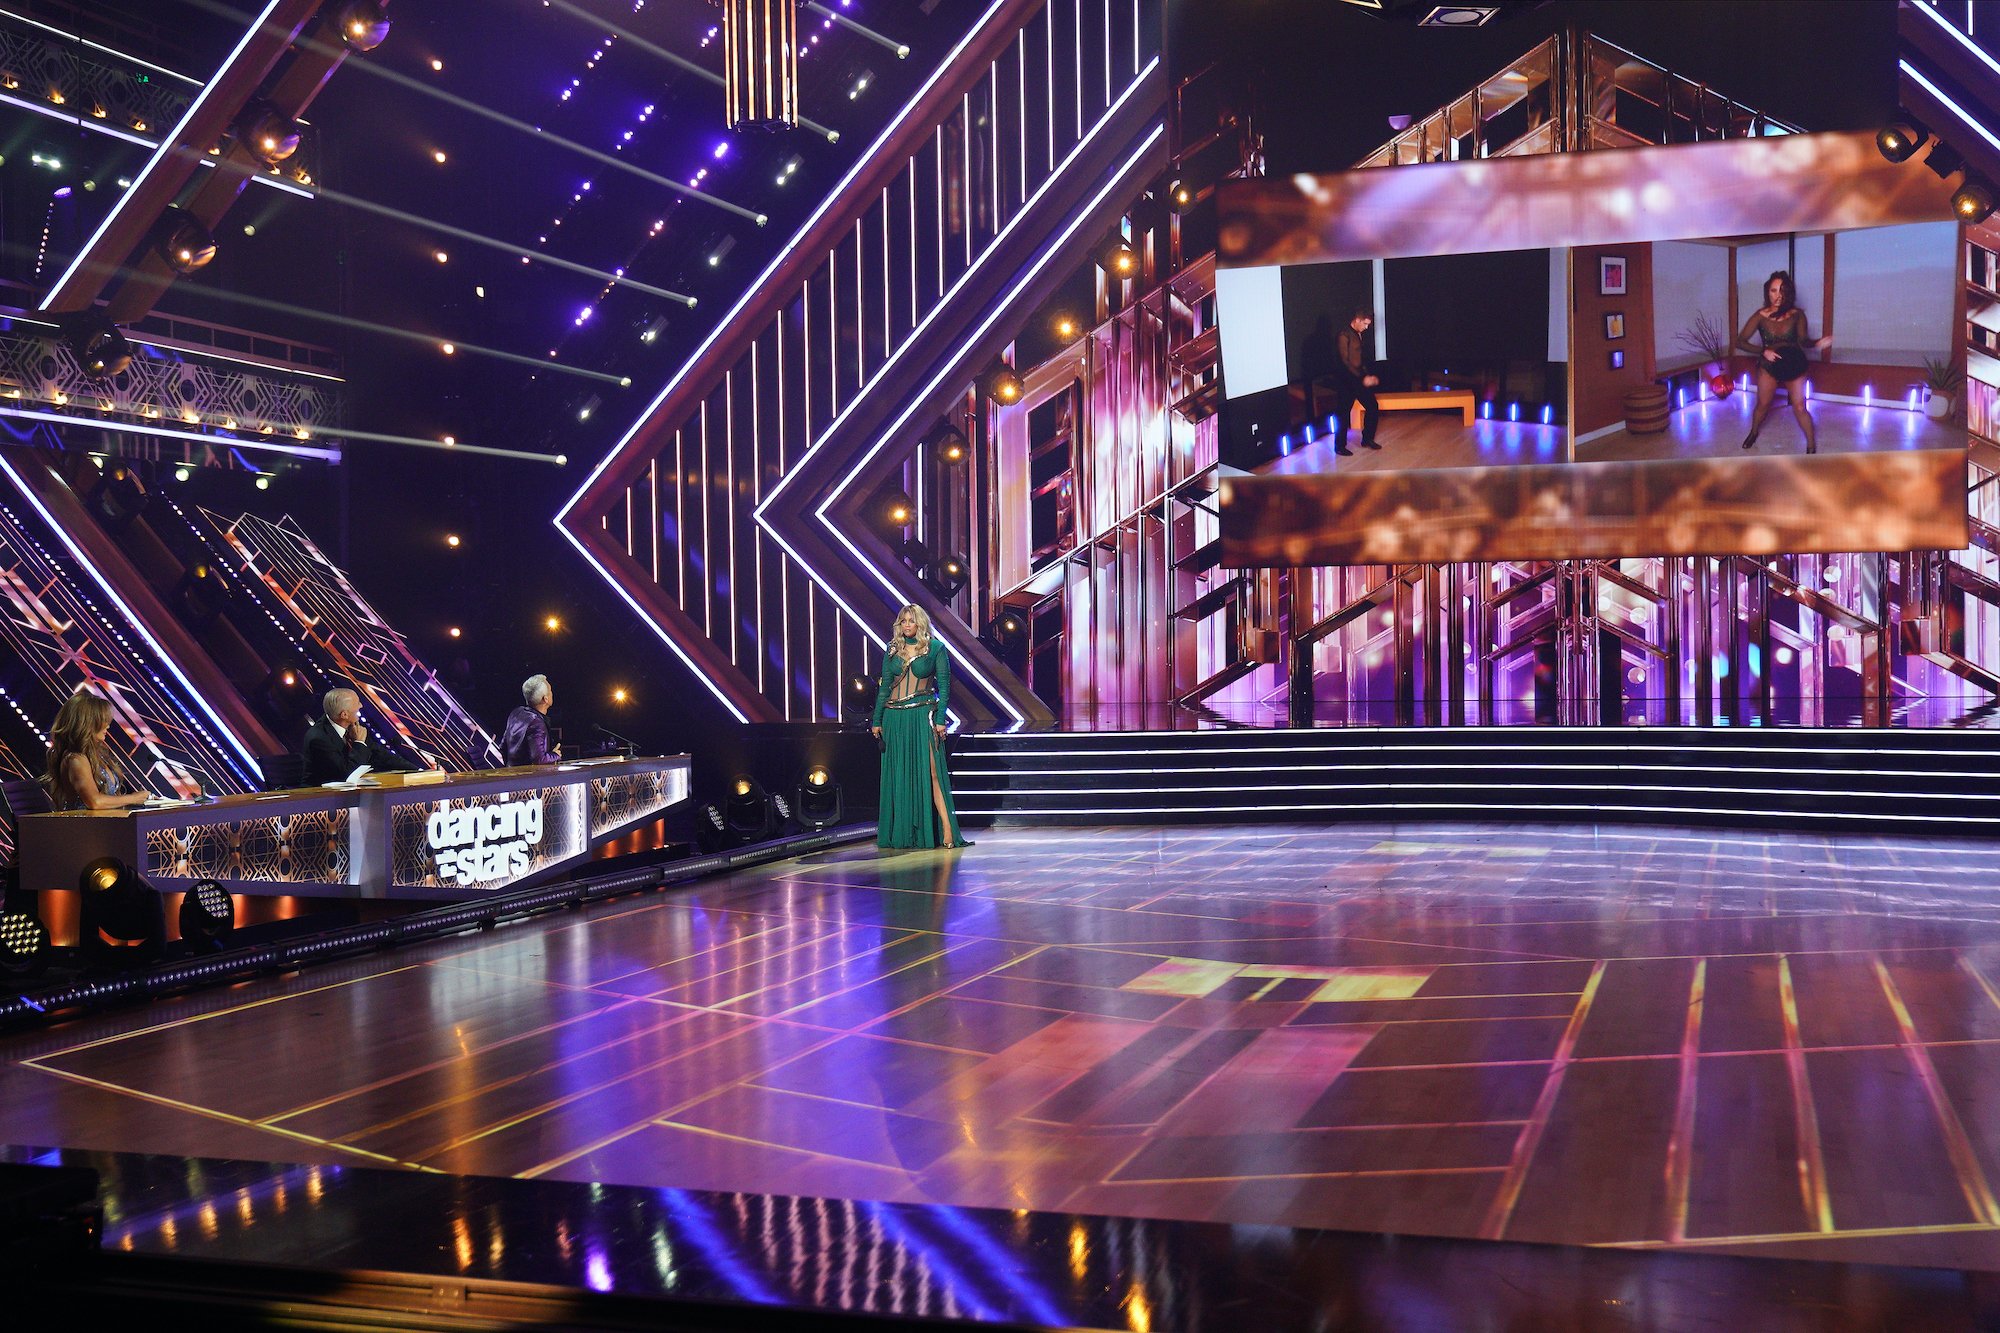 Carrie Ann Inaba, Len Goodman, and Bruno Tonioli sit at the judges table; Tyra Banks stands in the 'Dancing With the Stars' ballroom as Cody Rigsby and Cheryl Burke are projected onto the screen for their remote performance